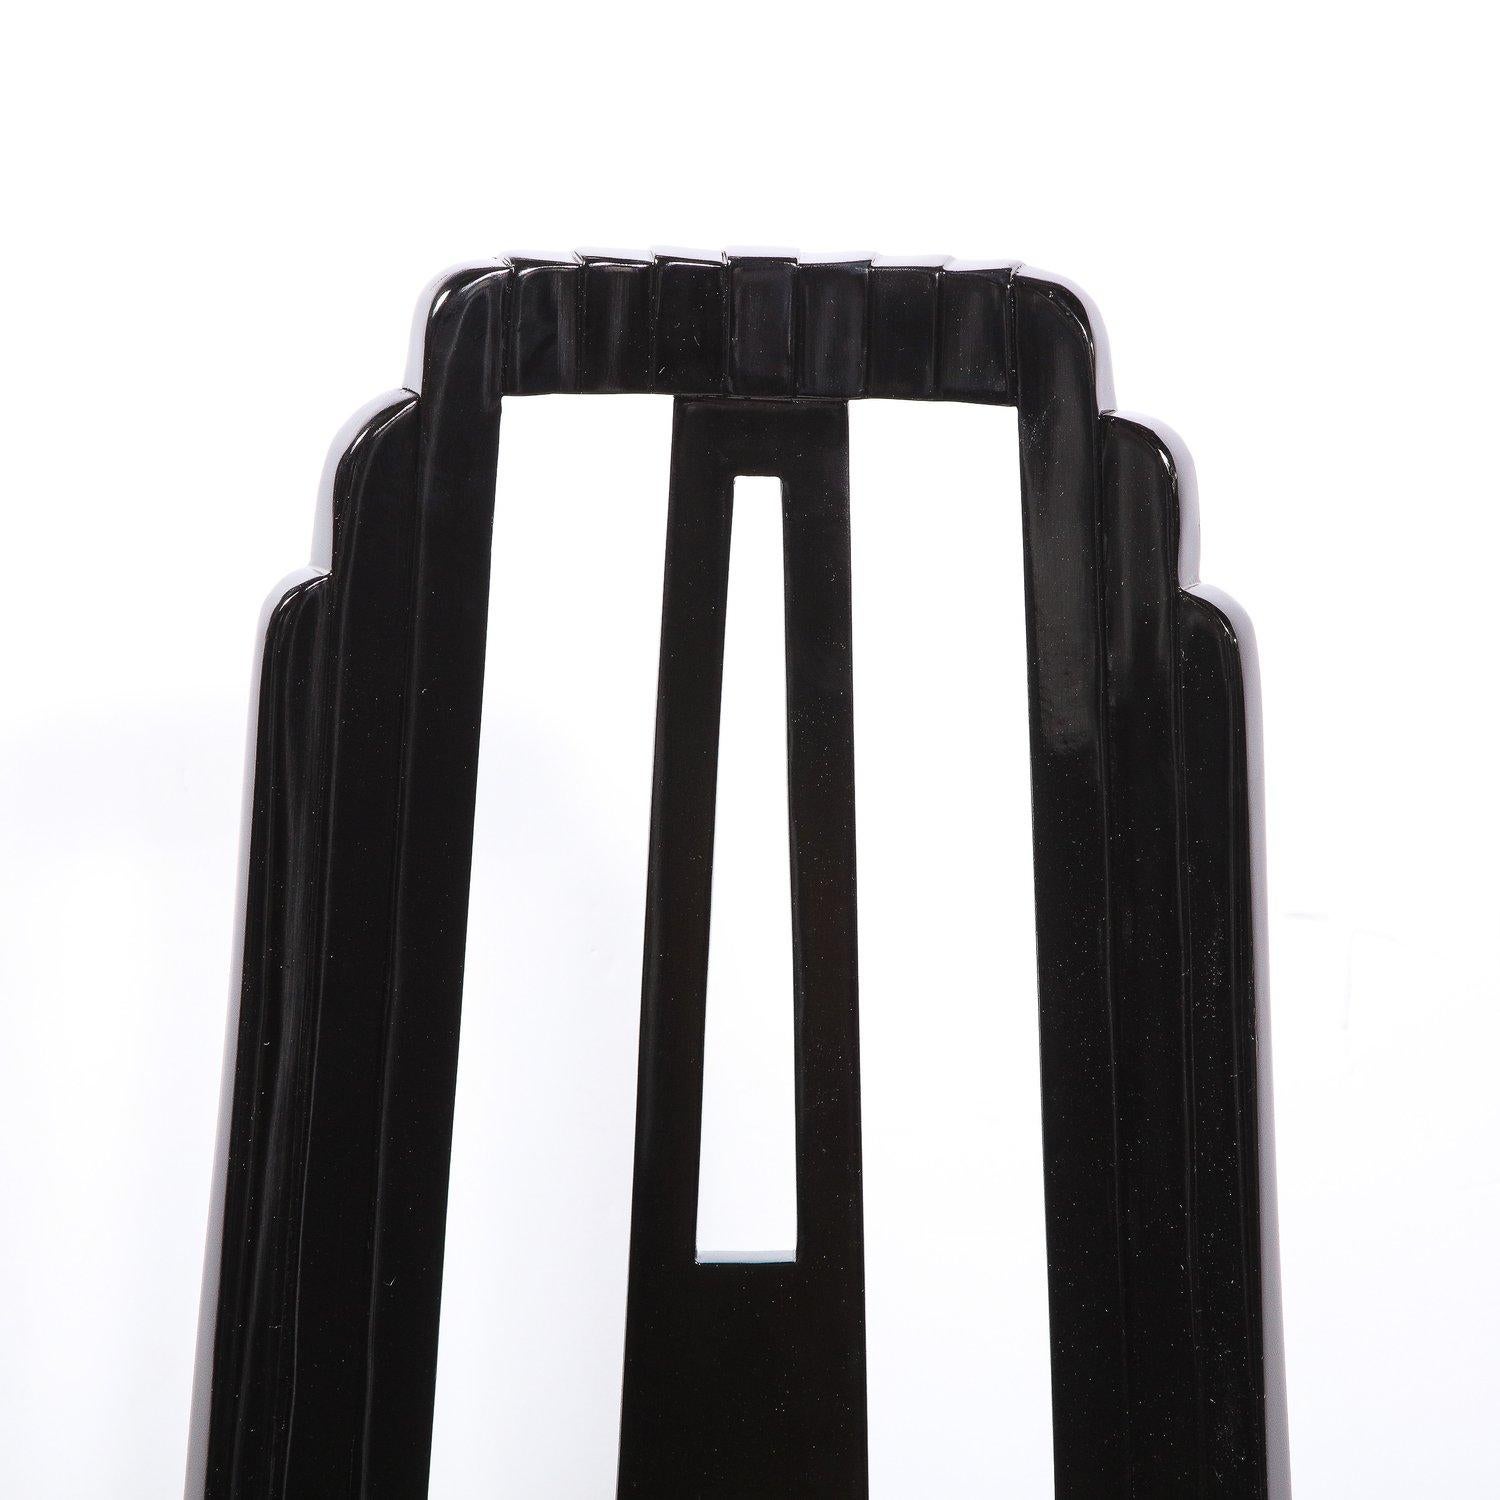 American Art Deco Skyscraper Style Dining Chair in Black Lacquer and Smoked Pewter Velvet For Sale